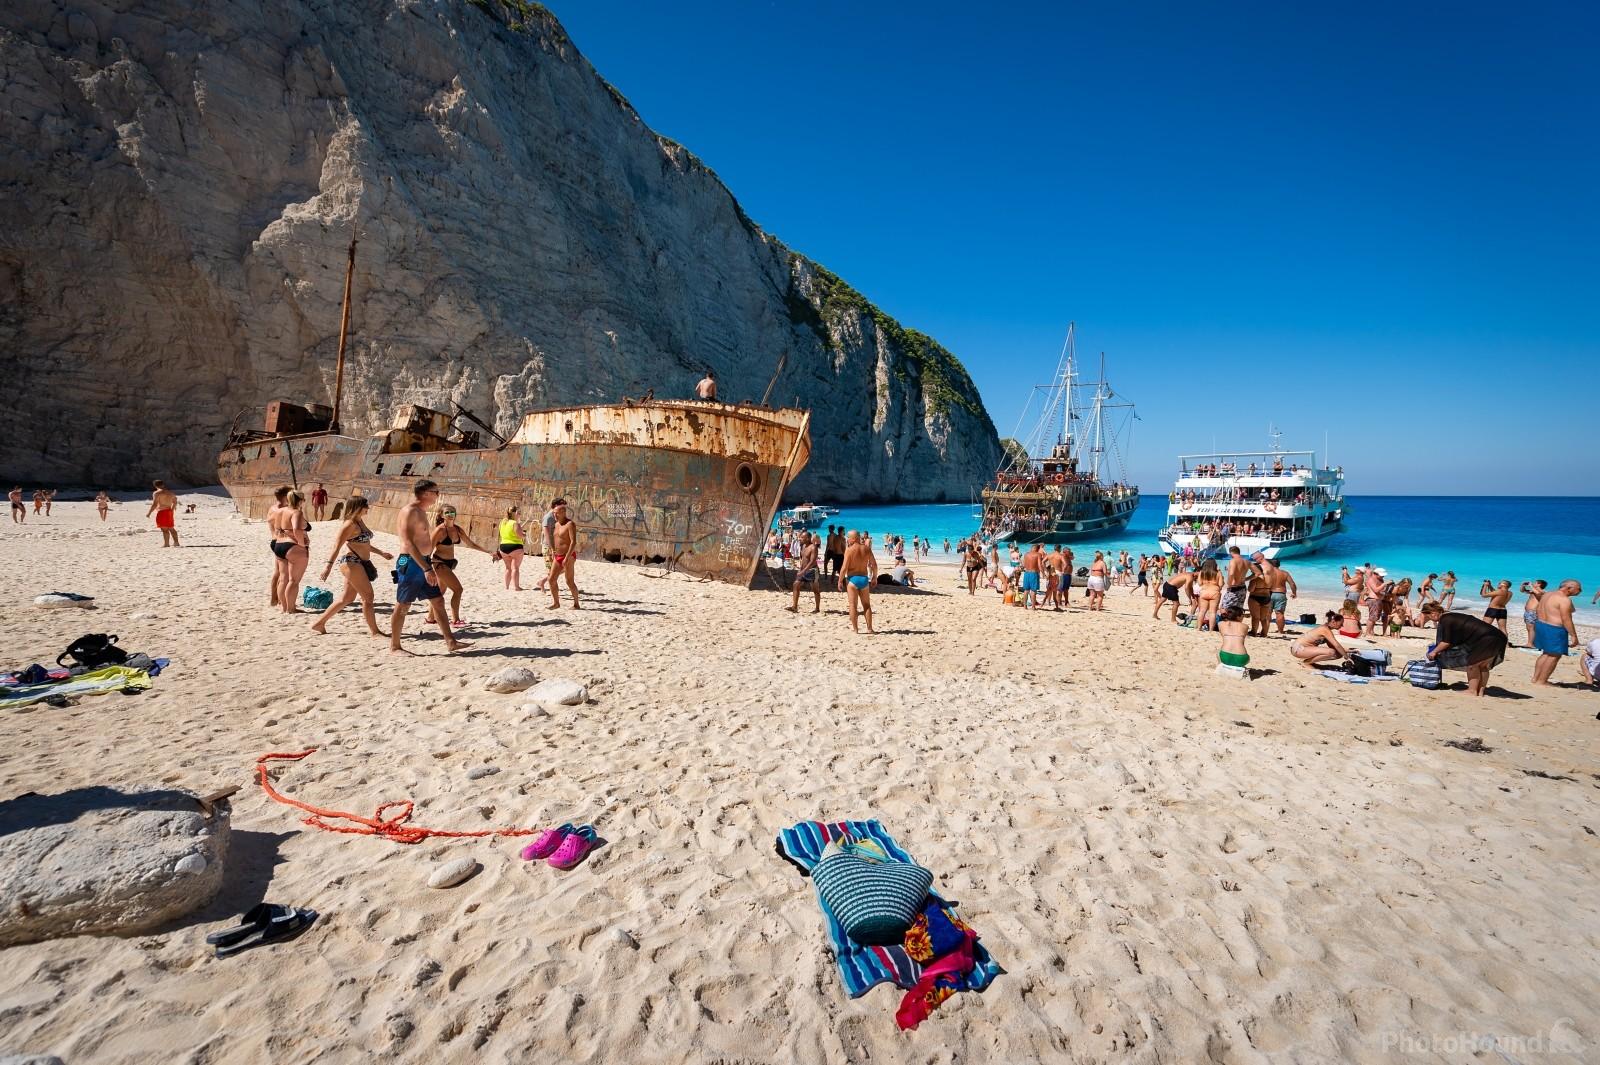 Image of Navagio Beach  from the beach itself by VOJTa Herout